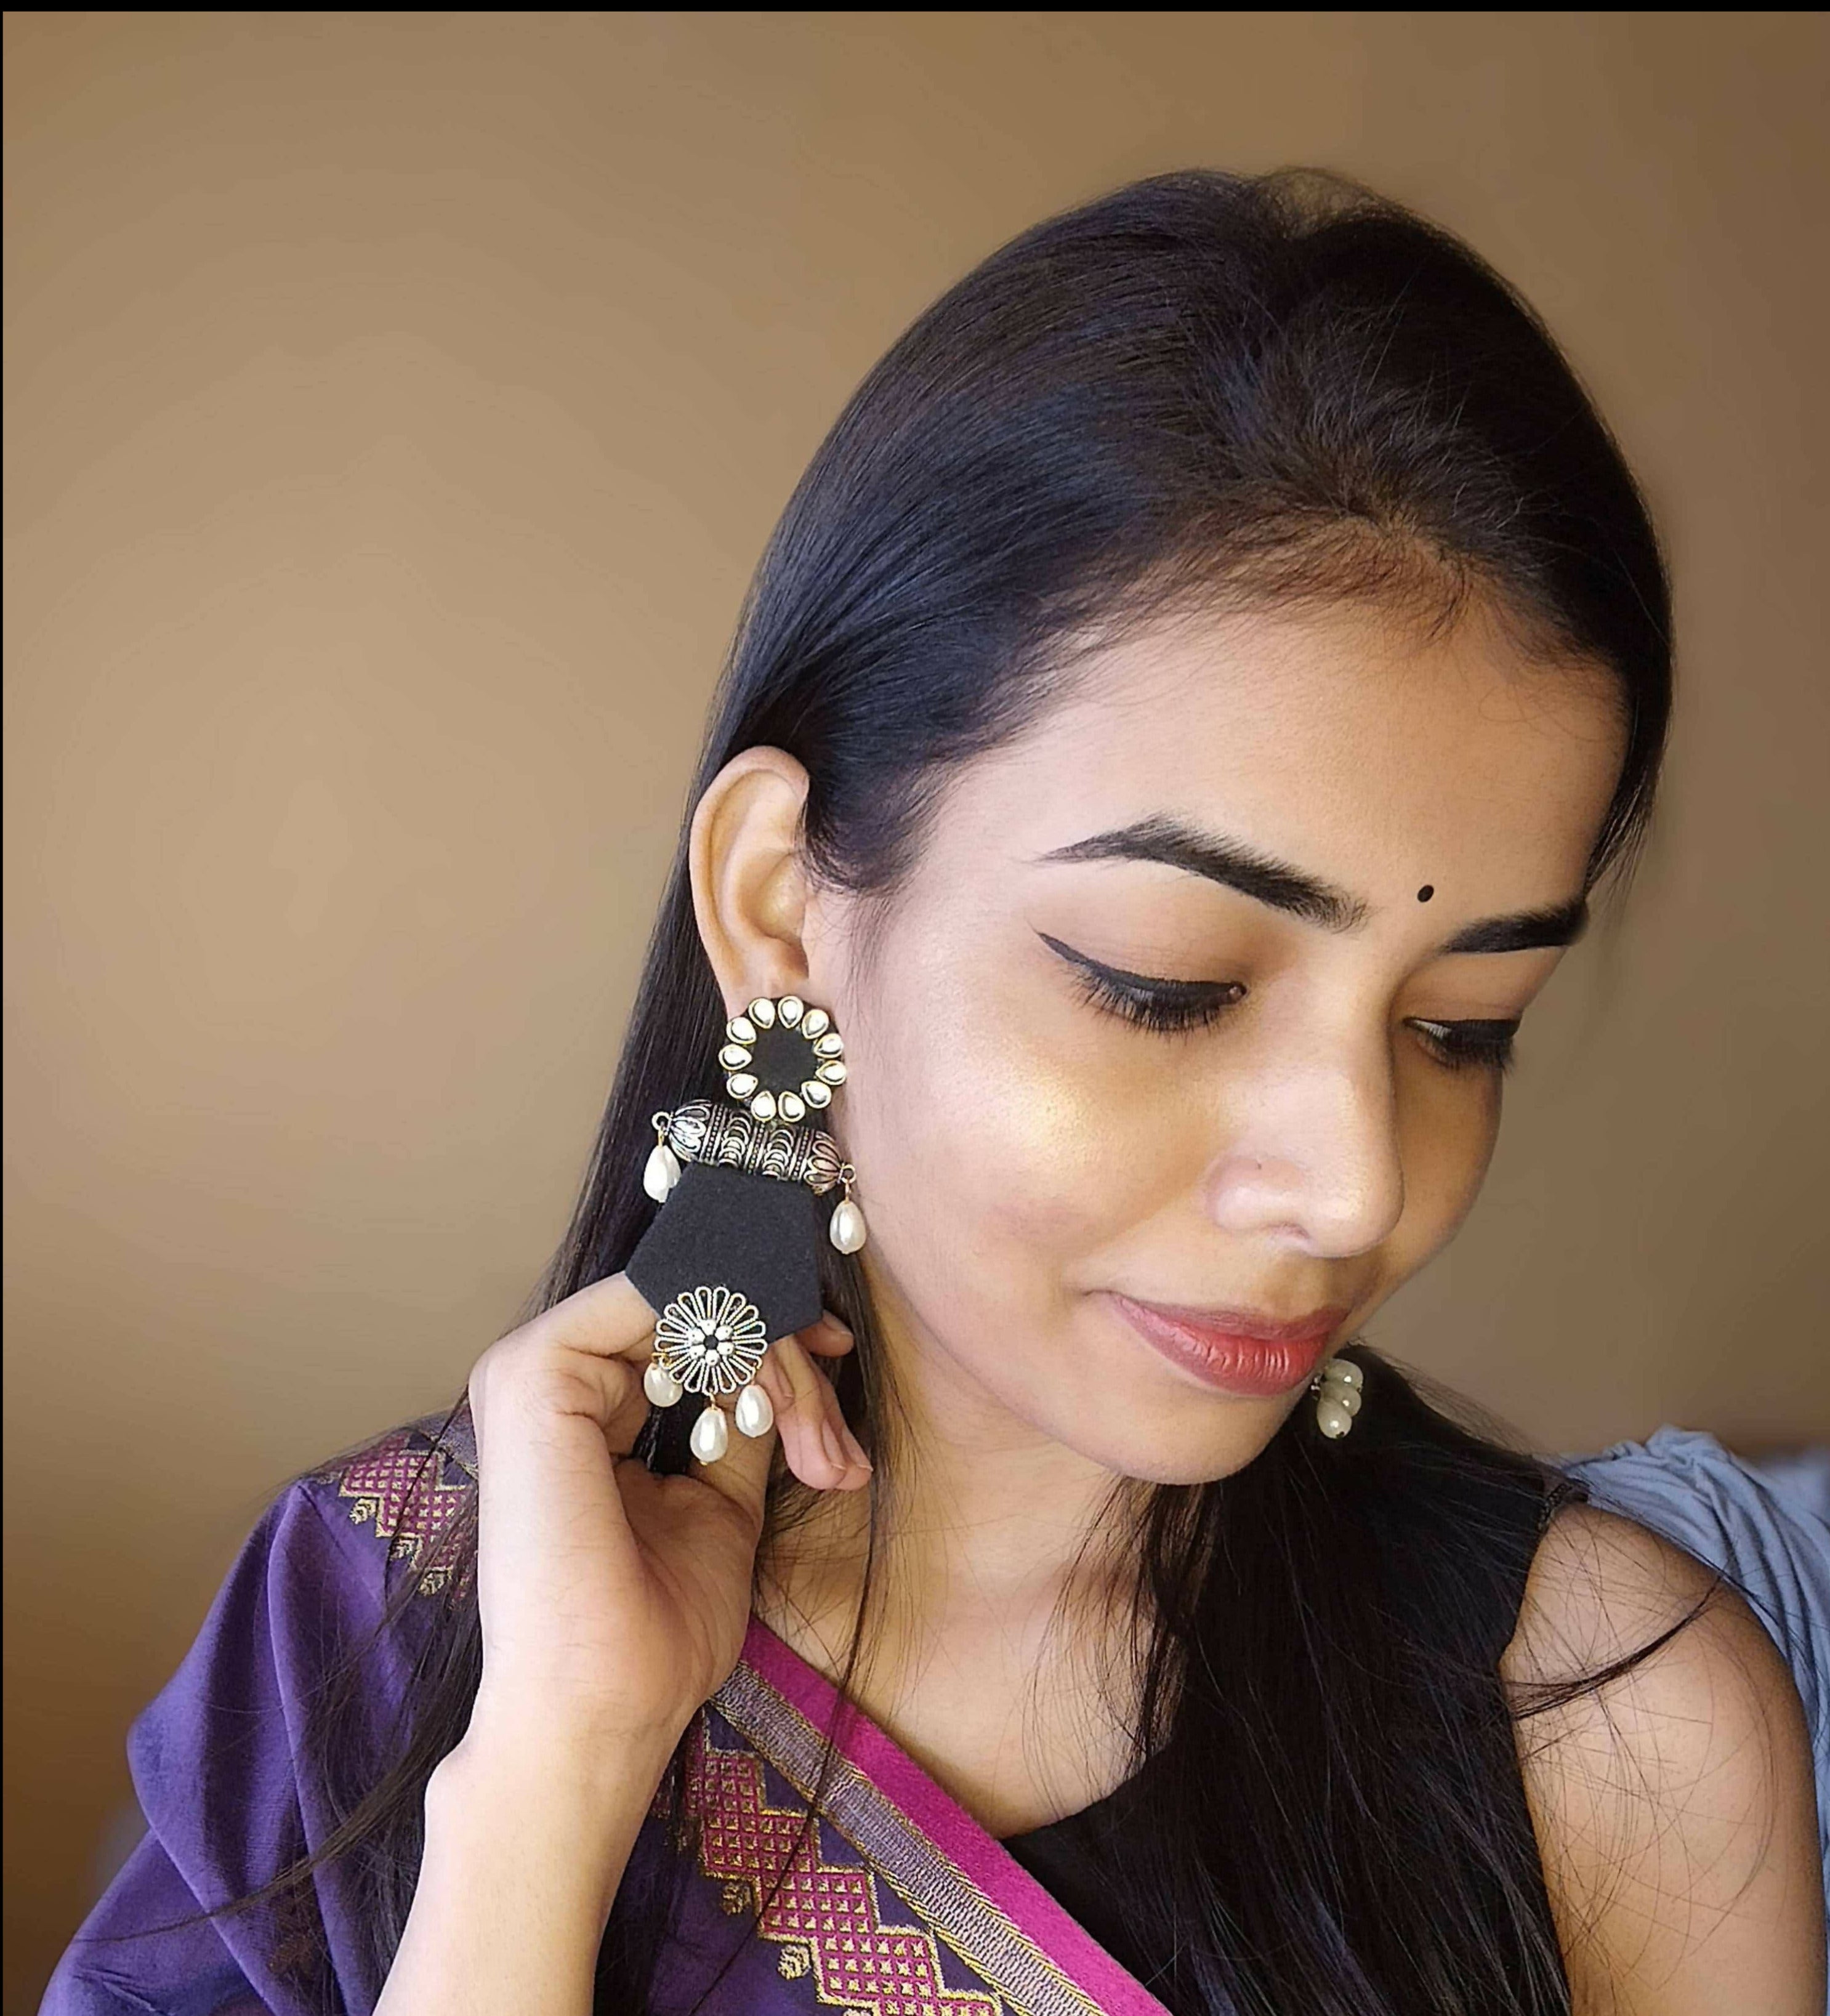 Black Wedding Earrings Online Shopping for Women at Low Prices